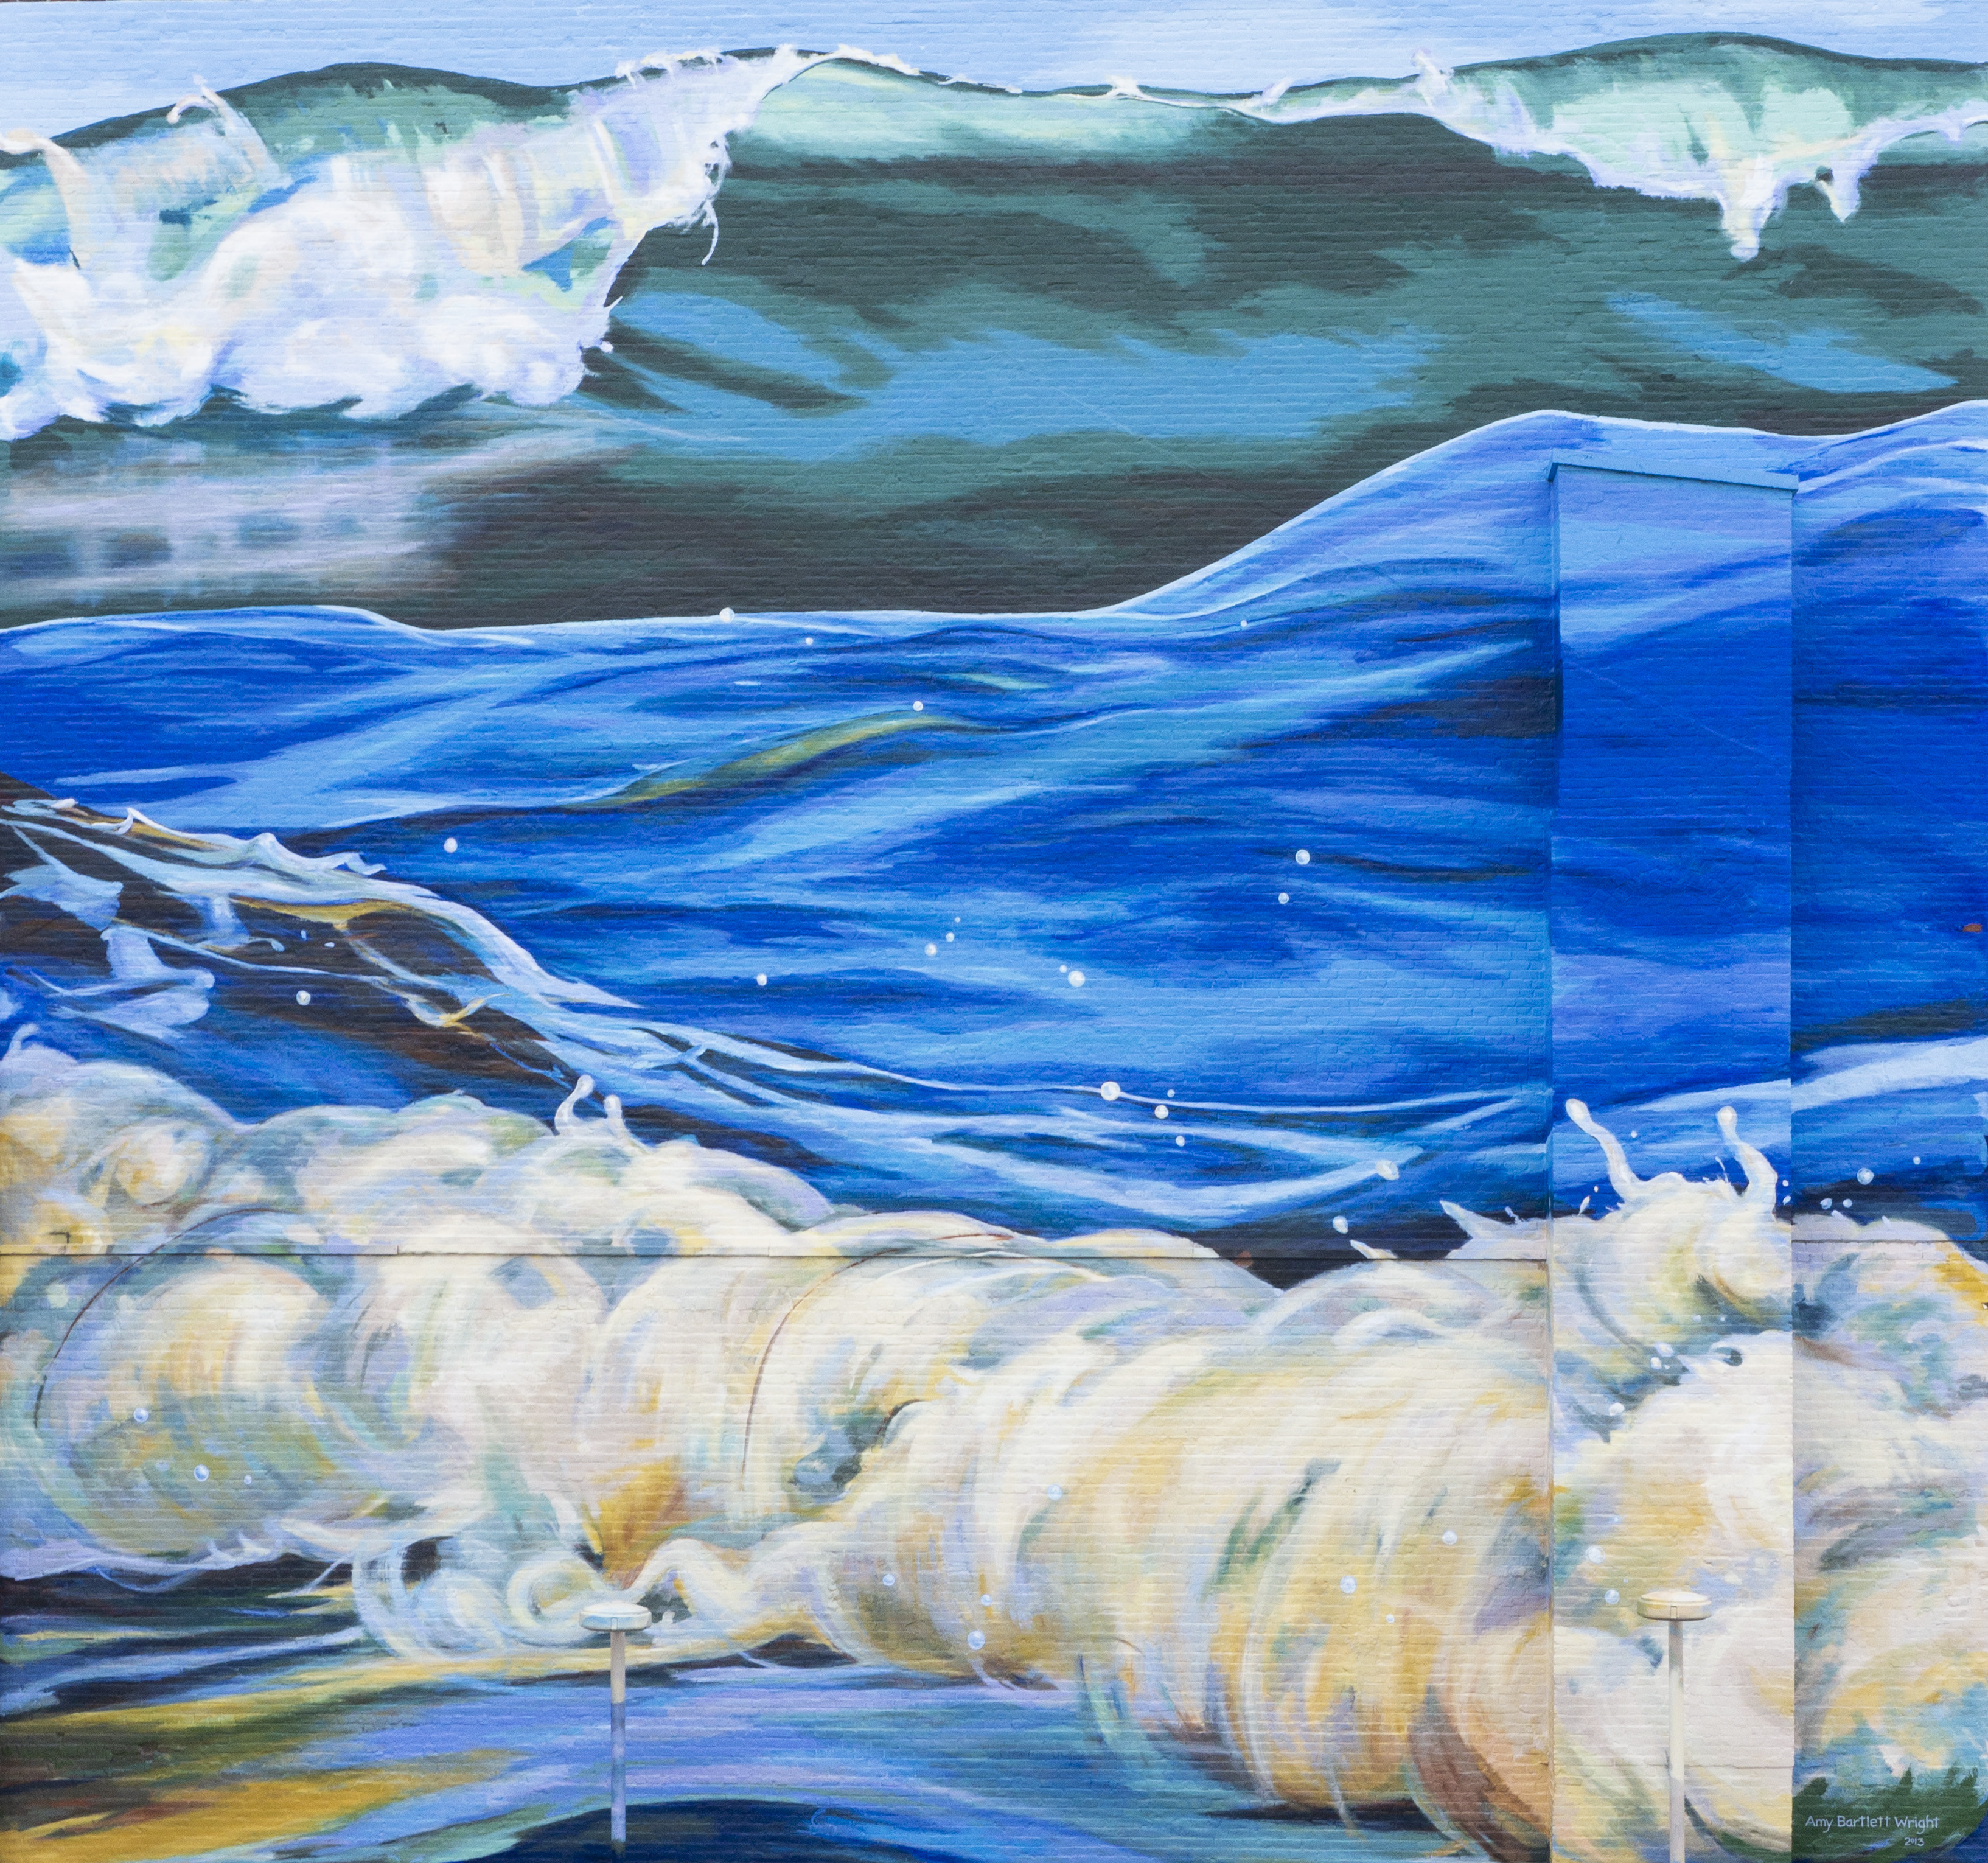 Amy Bartlett Wright - “Three Waves for Coastway” (2013) Photo by Micah Epstein